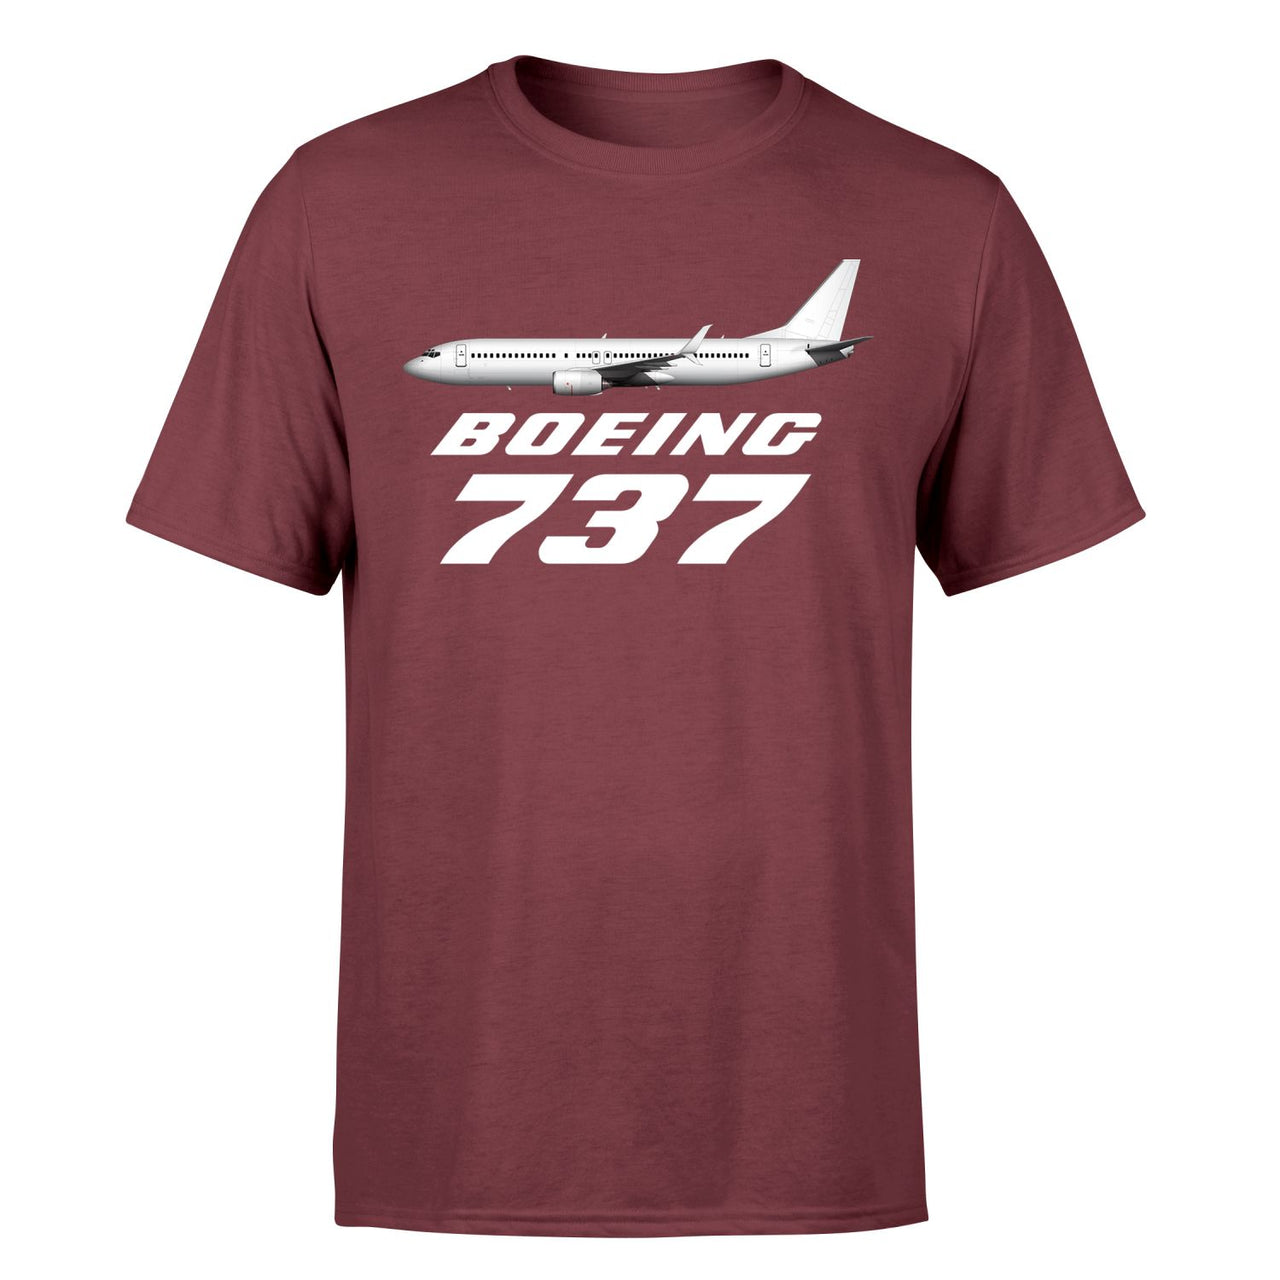 The Boeing 737 Designed T-Shirts